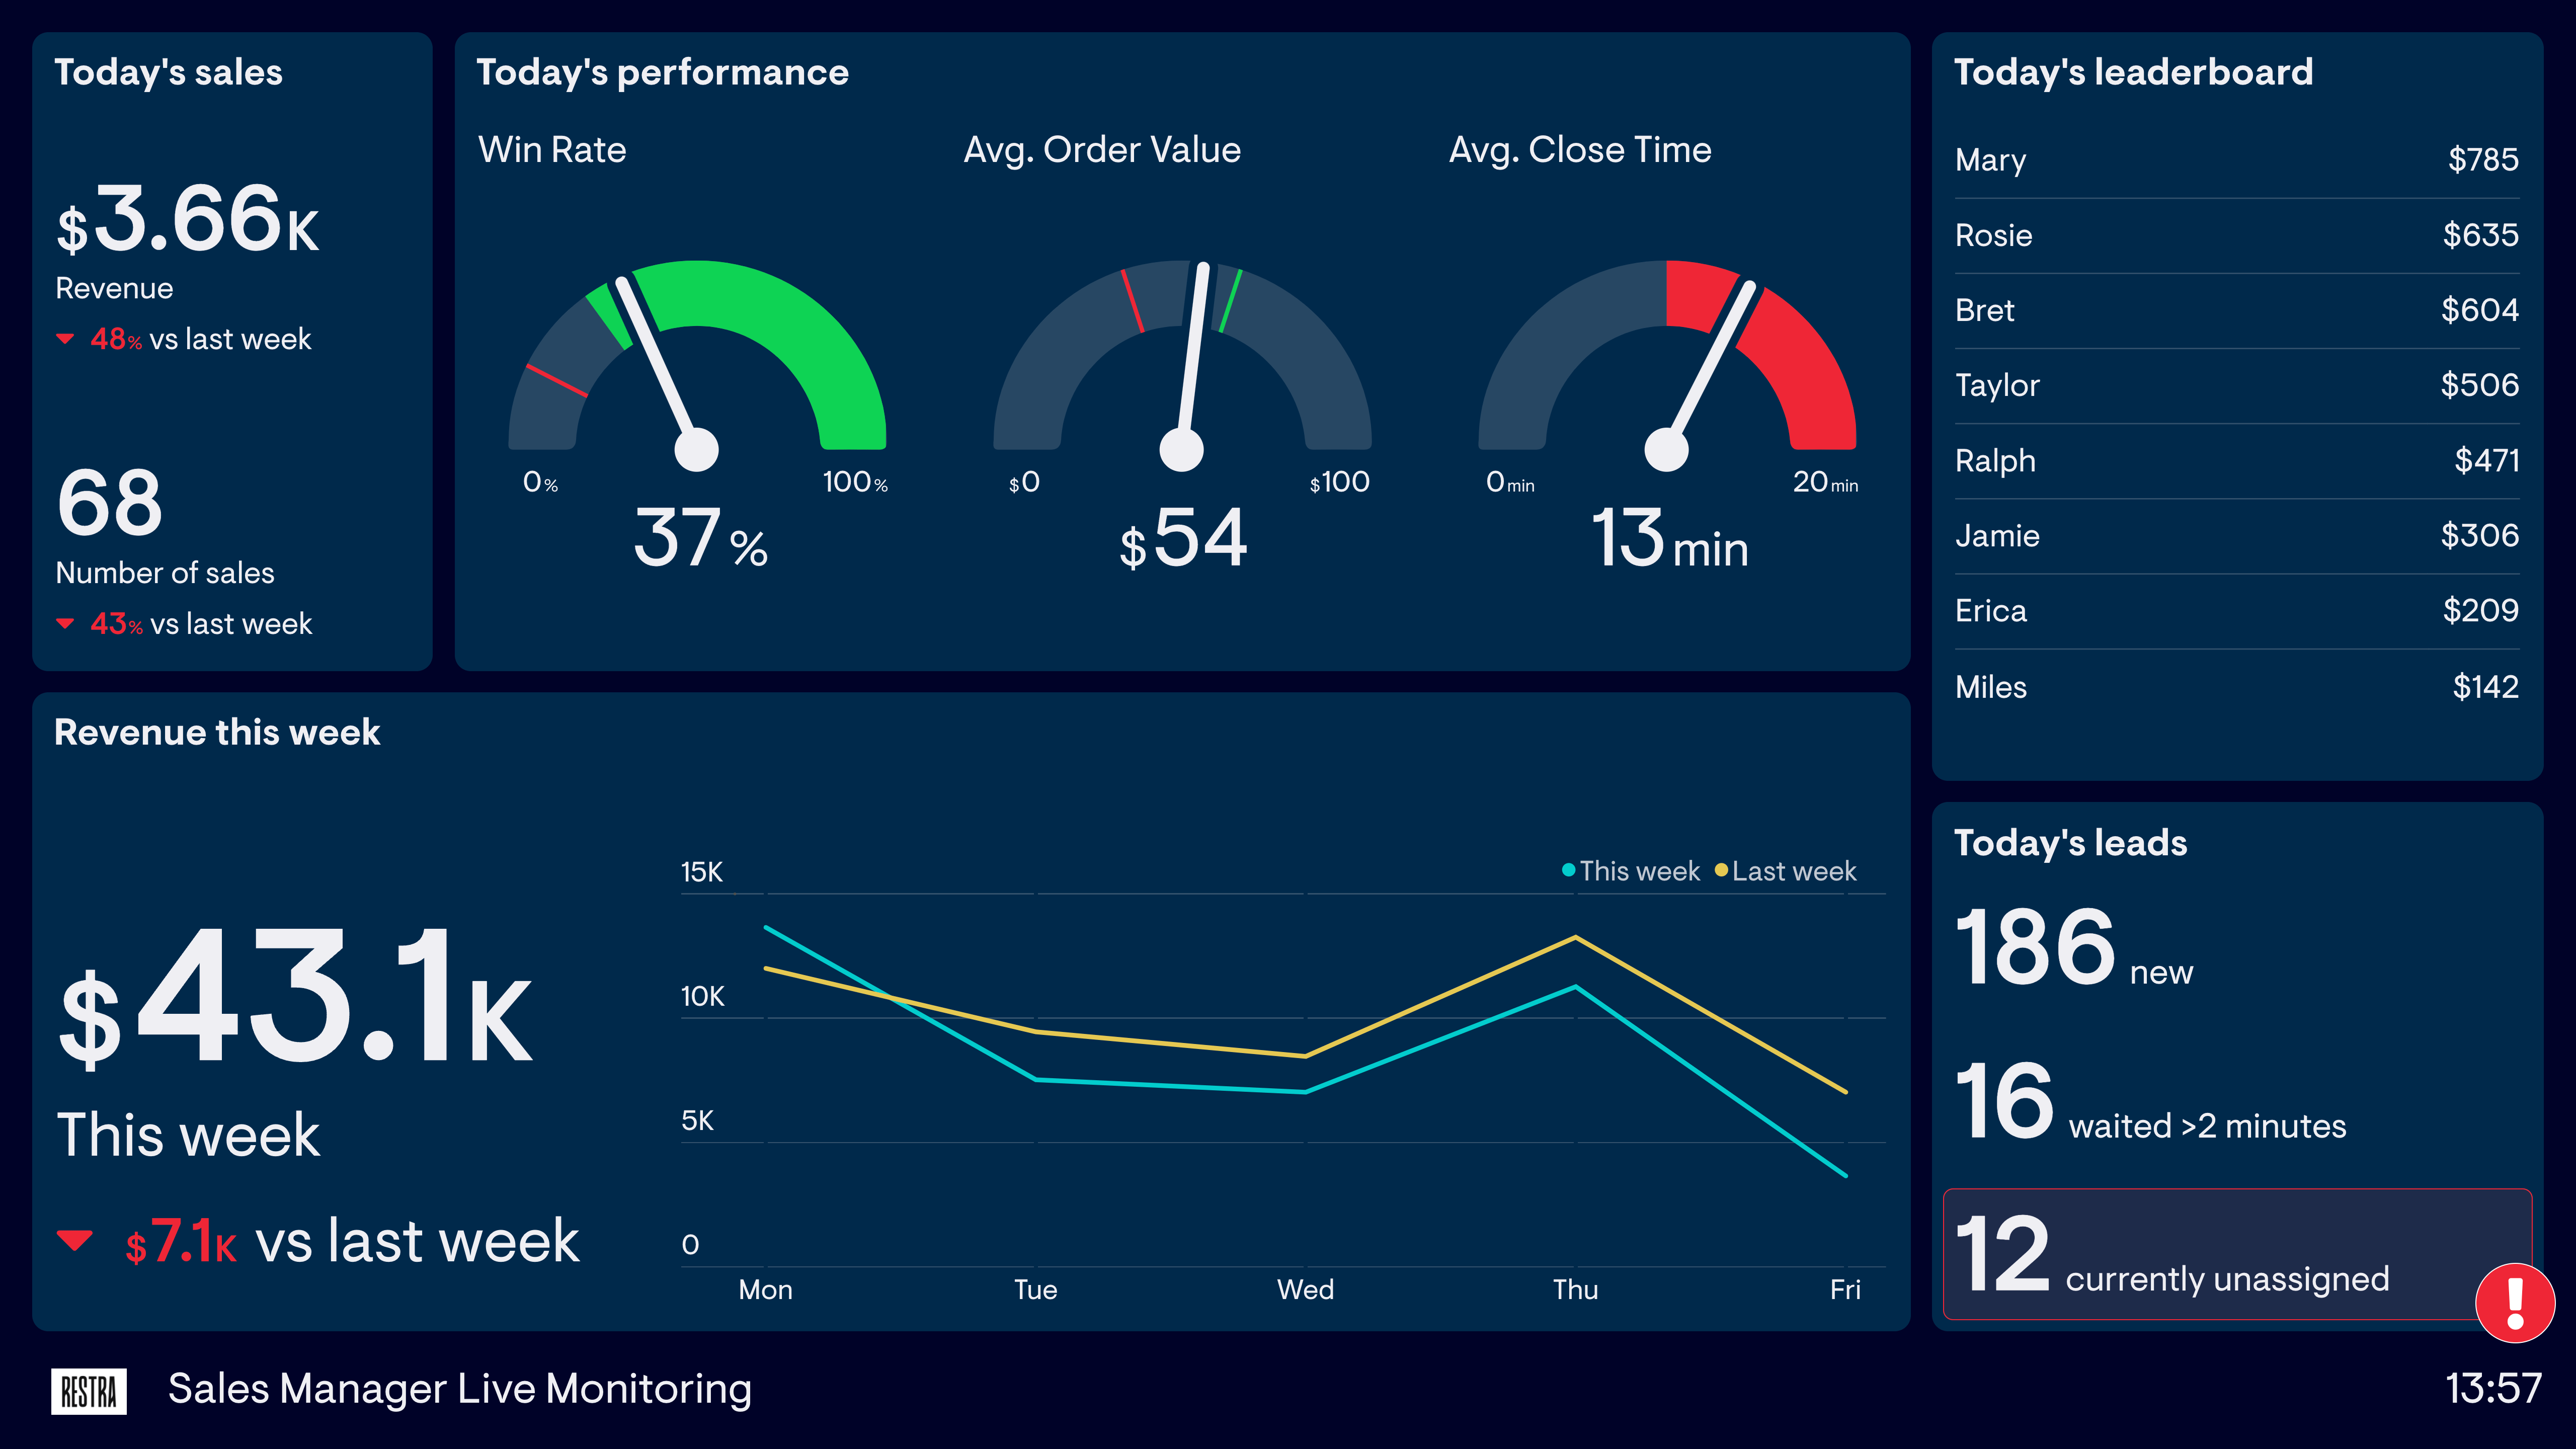 Example of a dashboard that gives a Sales Manager live updates on sales performance